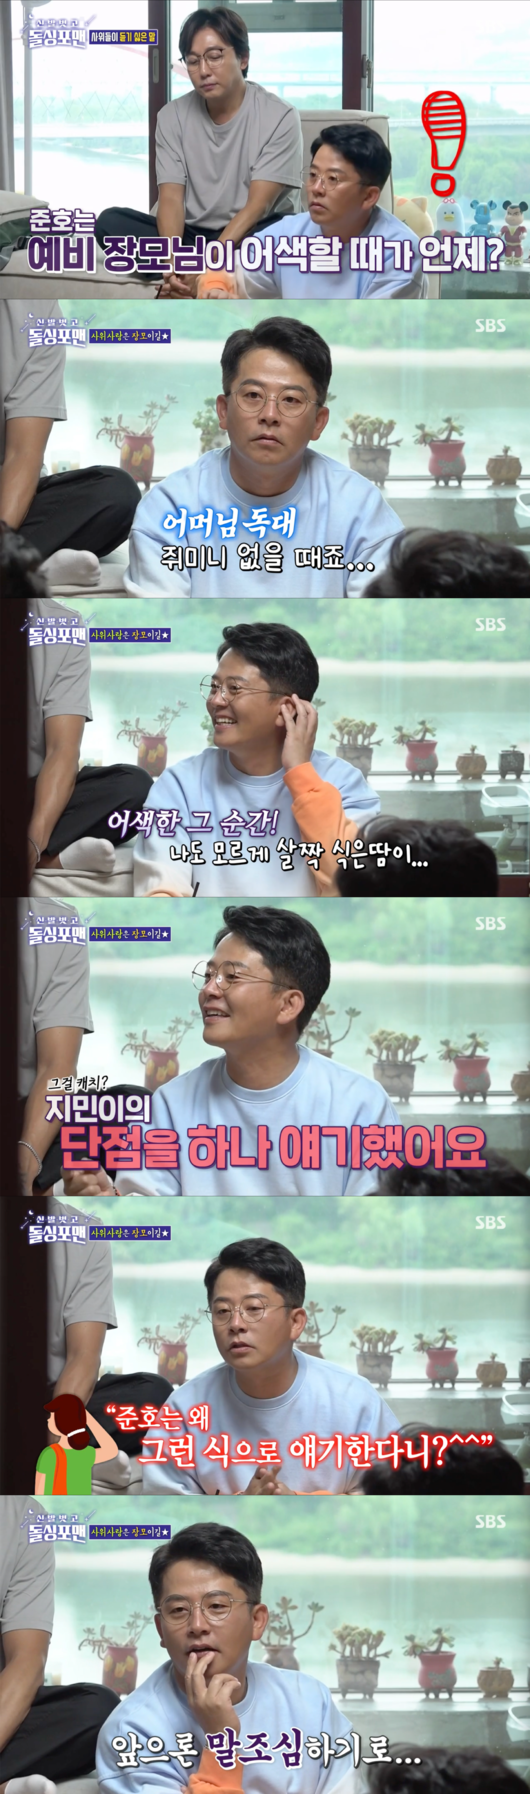 Comedian Kim Jun-ho mentioned the experience of meeting his girlfriend Kim Ji-mins mother and making a slip of the tongue.On the 9th SBS  ⁇  Take off your shoes and dolsing foreman  ⁇ , Kim Tae Hyun and Mirja Boes married Mirja Boes mother, Jeon Seong-ae.On this day, Kim Jun-ho said that the most awkward moment with the prospective Zhang Mo and Kim Ji-mins mother was when  ⁇  Jimin was absent.When I go to the bathroom or leave my dog, I get cold sweat, he said. But I want to continue somehow. Mom does not like her daughter either. So I told Jimin one of the disadvantages.But it went well, he said.Kim Jun-ho then said to Jimin the next day, My mother told me why she told you so. When I thought about it, I thought, Why did I say that? I recalled the situation I regretted.Kim Tae Hyun also mentioned his mistake. Kim Tae Hyun was talking to his mother and drinking makgeolli and the atmosphere was so good that he praised Mirja Boes. ⁇  Mirja Boes is good at saying things that make people feel good. It seems to be a good thing, but it is only when I feel good.  ⁇   ⁇   ⁇   ⁇   ⁇  Then my mother suddenly became a woman.Suddenly he hit me, and I thought I should not let go of the tension all the time. No matter how close I am, I should think that it is my mother, not my mother. Kim Tae Hyun and Kim Jun-ho also talked about a gift for a meeting. Kim Tae Hyun said she presented luxury cosmetics for Jeon Seong-ae, and Mirja Boes searched for a gift for a meeting.Jeon Seong-ae smiled with a smile and said, I bought my favorite cosmetics at my age and I was satisfied.Kim Jun-ho said, I stood in line at dawn and bought bread and took it. My mothers first word was I do not like bread.Kim Tae Hyun said, My heart is so warm and good, but I should have grasped the needs of my customers. When I think about it, it is actually my mothers favorite thing rather than a gift.It is best to like Jimin more.However, Tak Jae-hun disagreed with this opinion. Tak Jae-hun laughed when he said, Let Jimin go because your mother likes it.broadcast capture